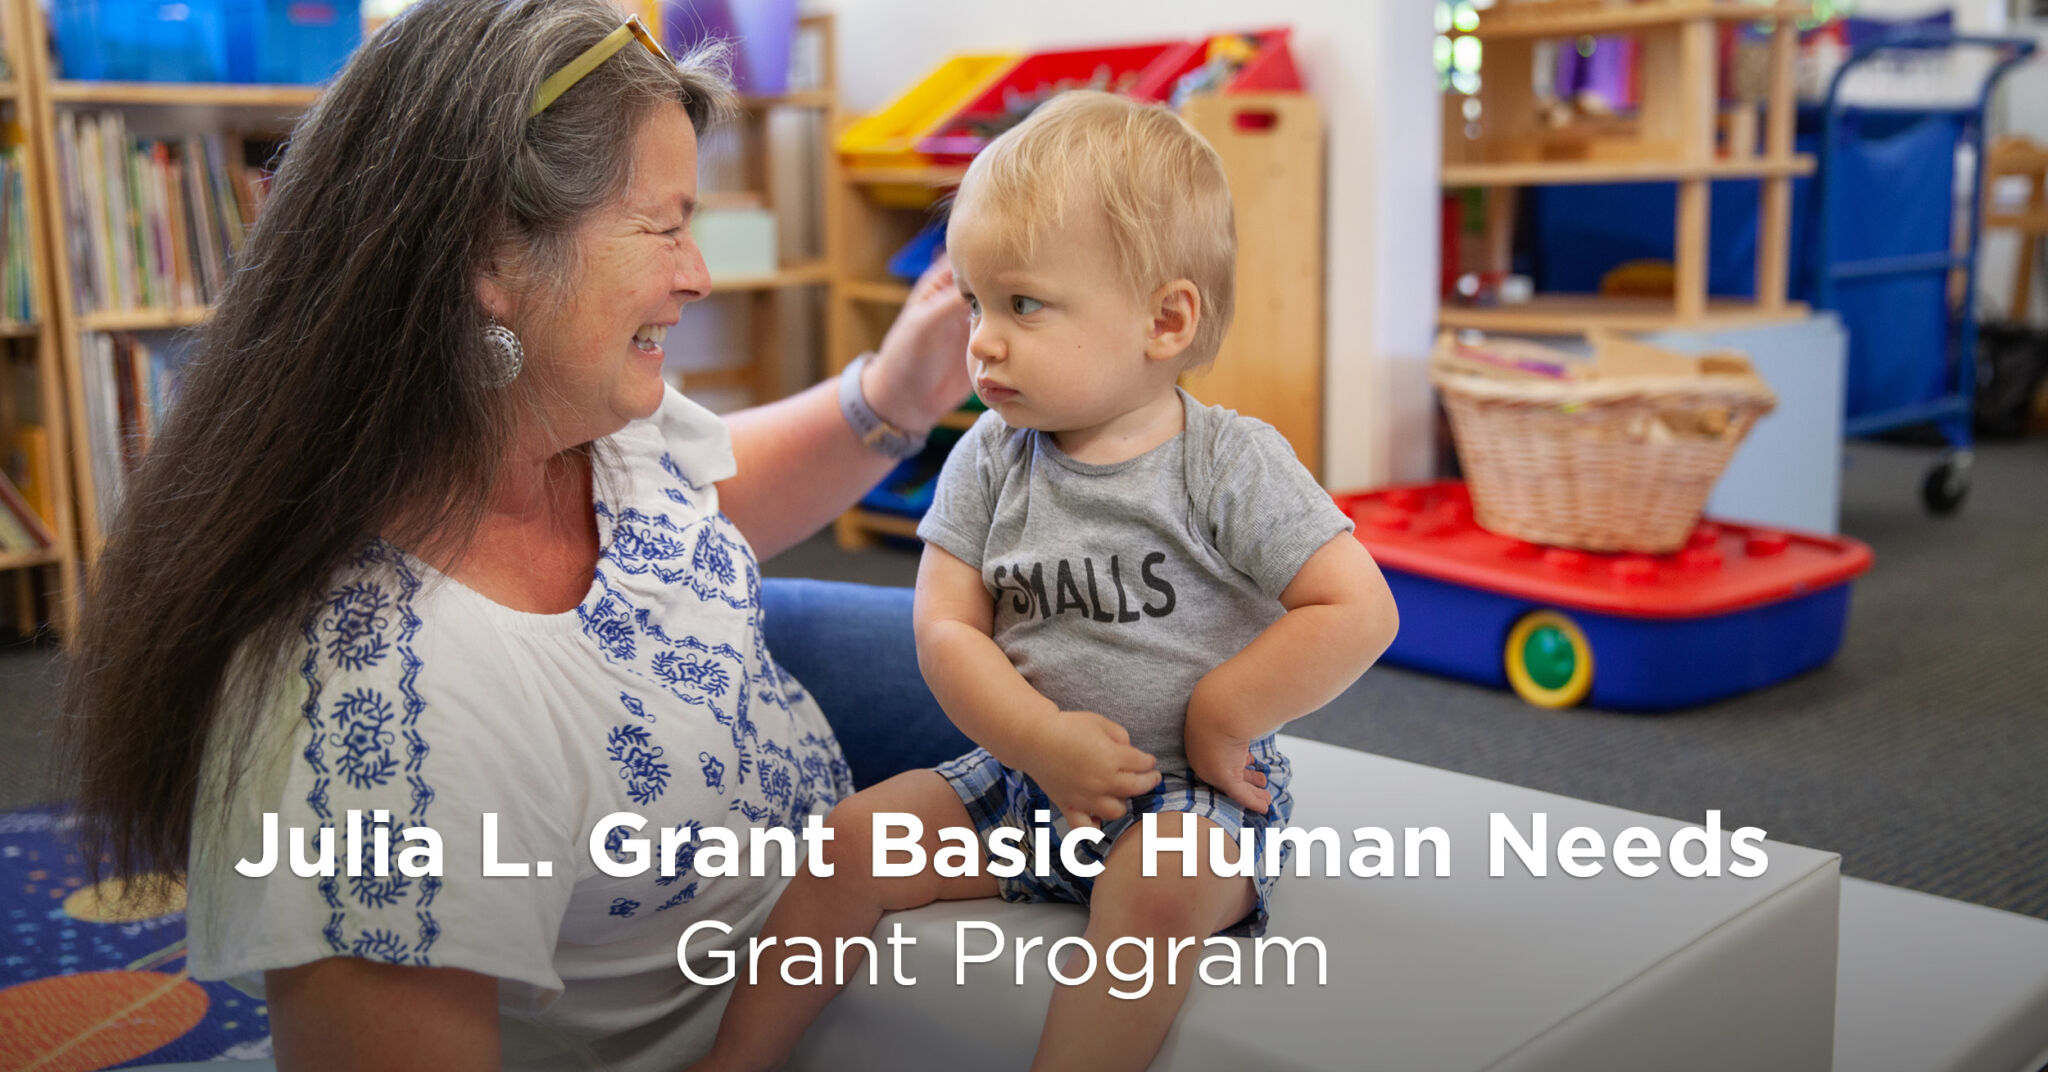 Grant Applications Open for our Julia L. Grant Fund for Basic Human Needs